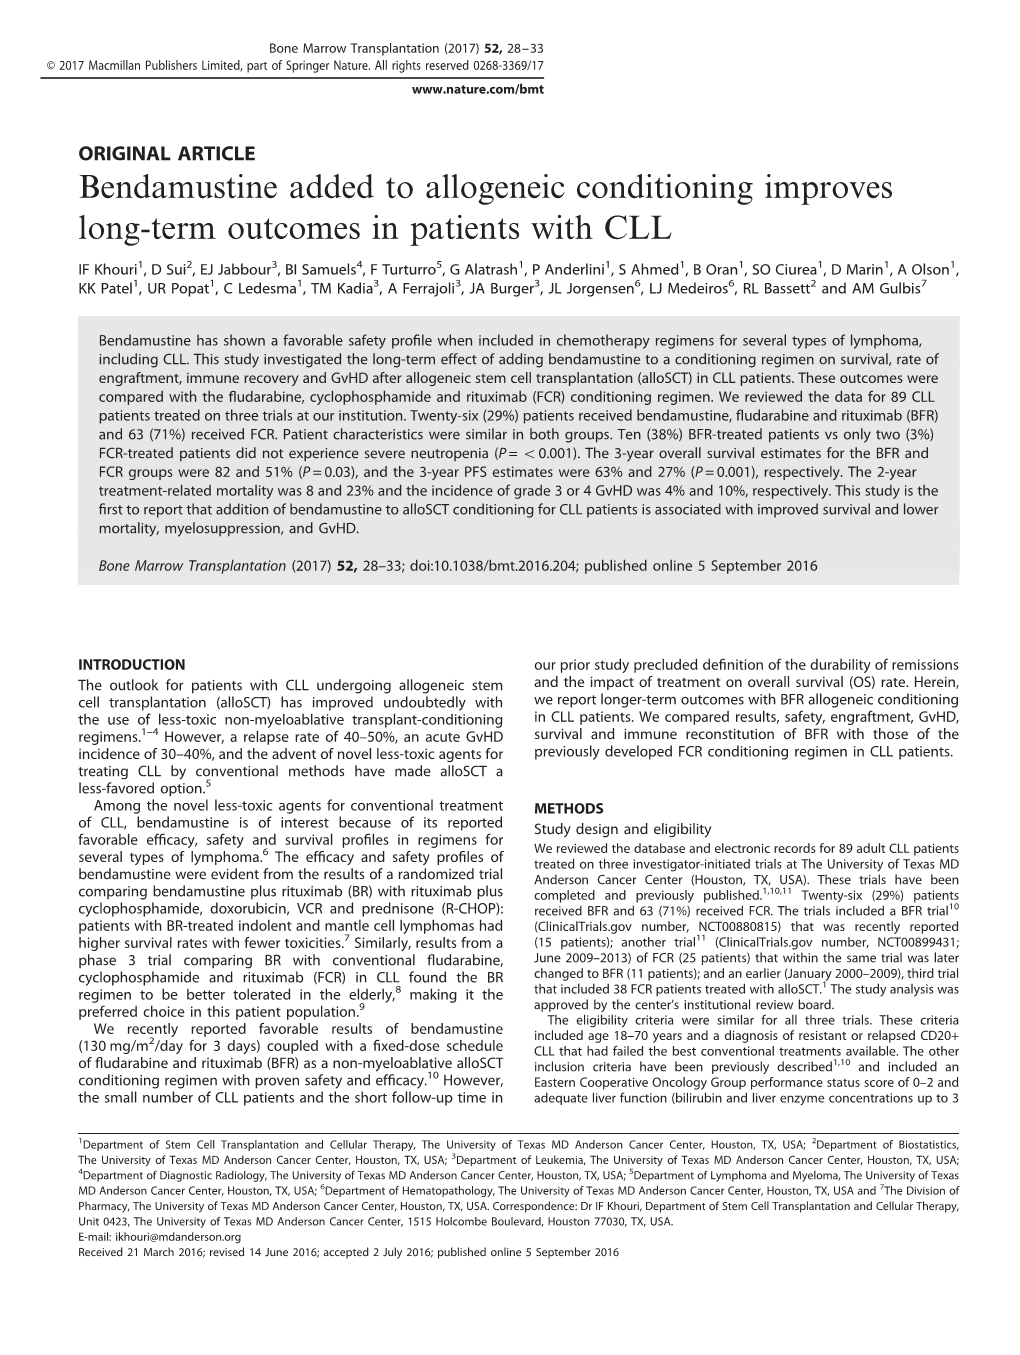 Bendamustine Added to Allogeneic Conditioning Improves Long-Term Outcomes in Patients with CLL